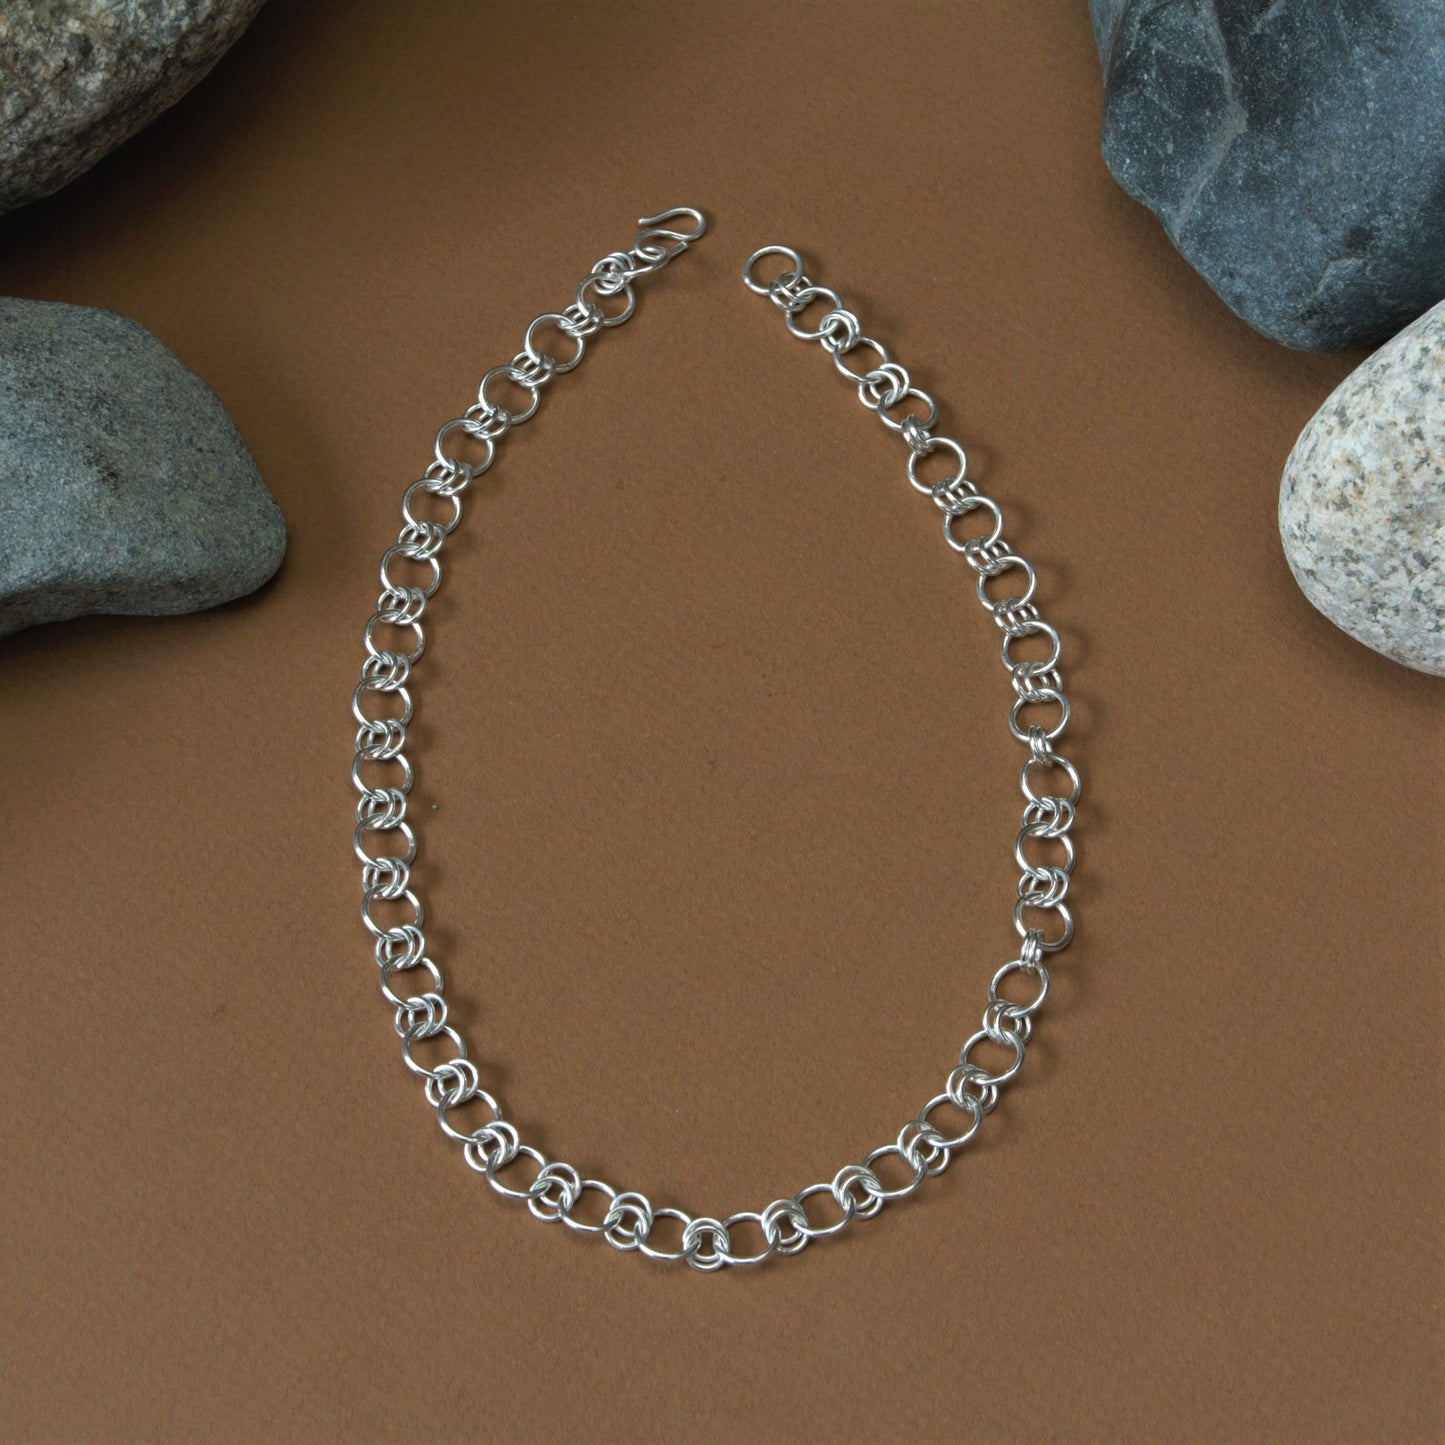 HOOPLA CHAIN NECKLACE